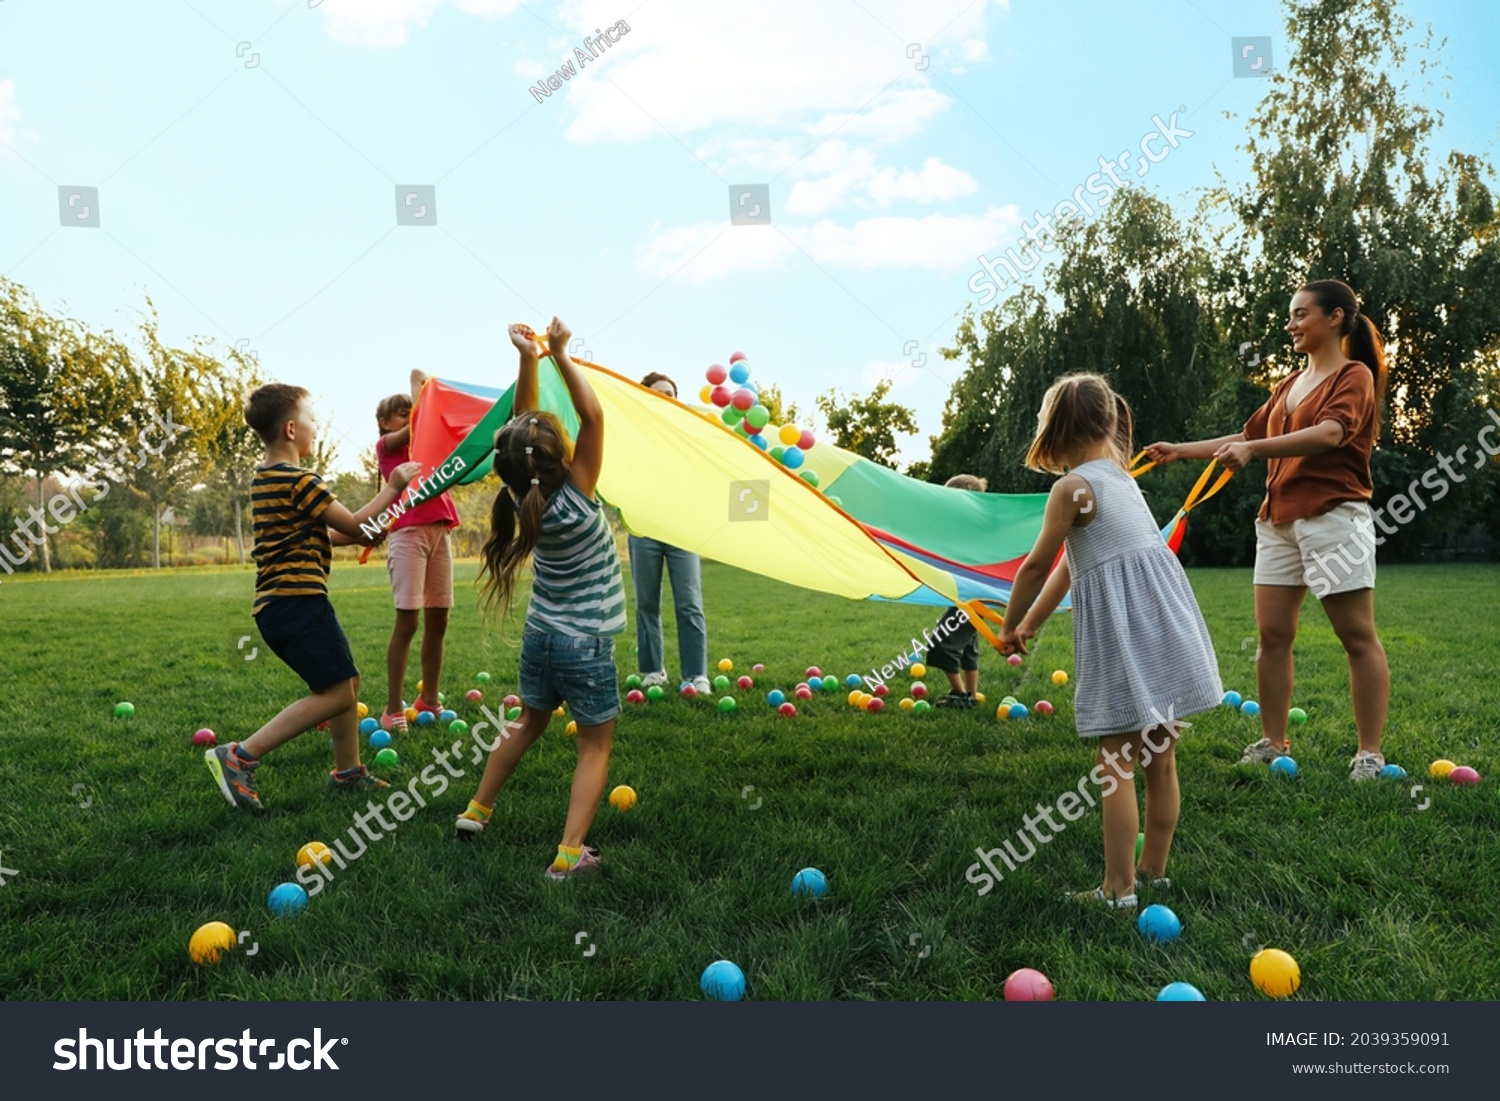 Group of children and teacher playing with rainbow playground parachute on green grass. Summer camp activity #2039359091